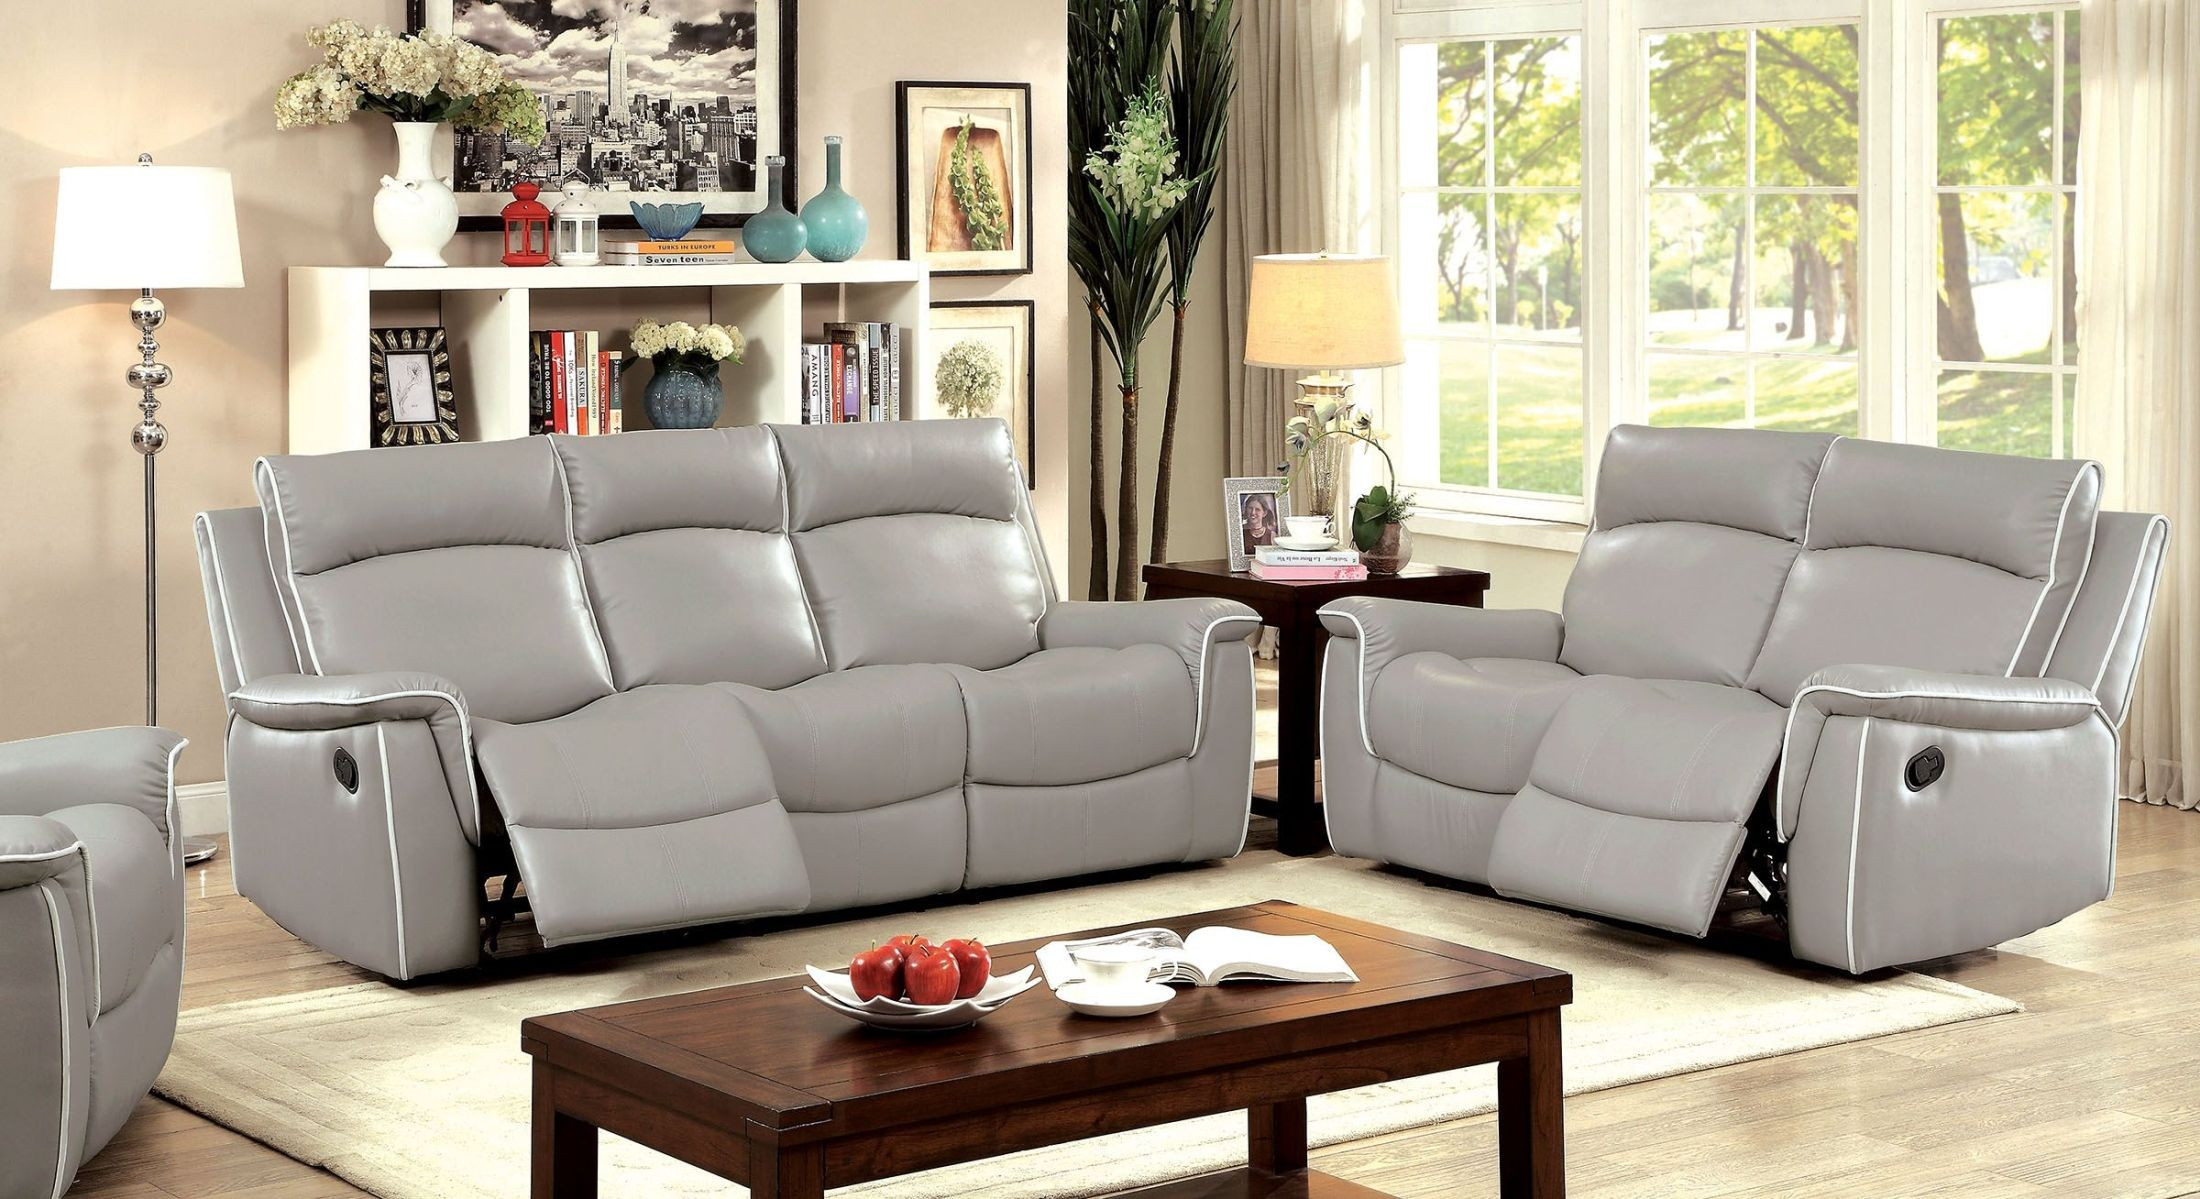 Grey Living Room Sets With Recliner